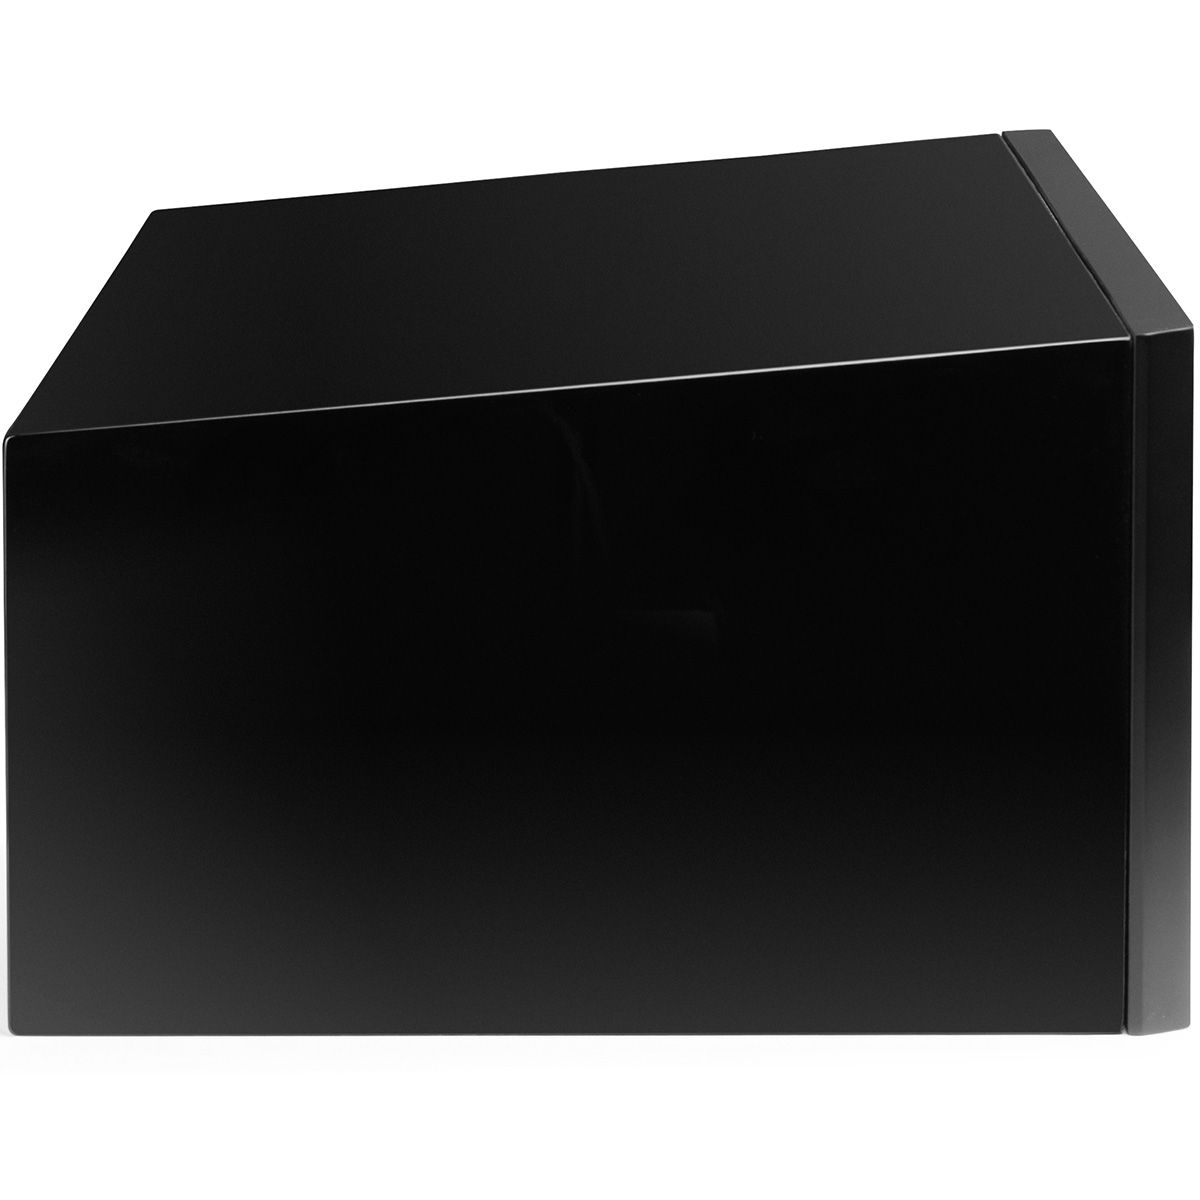 MartinLogan XT C100 center channel speaker side view in black without grilles